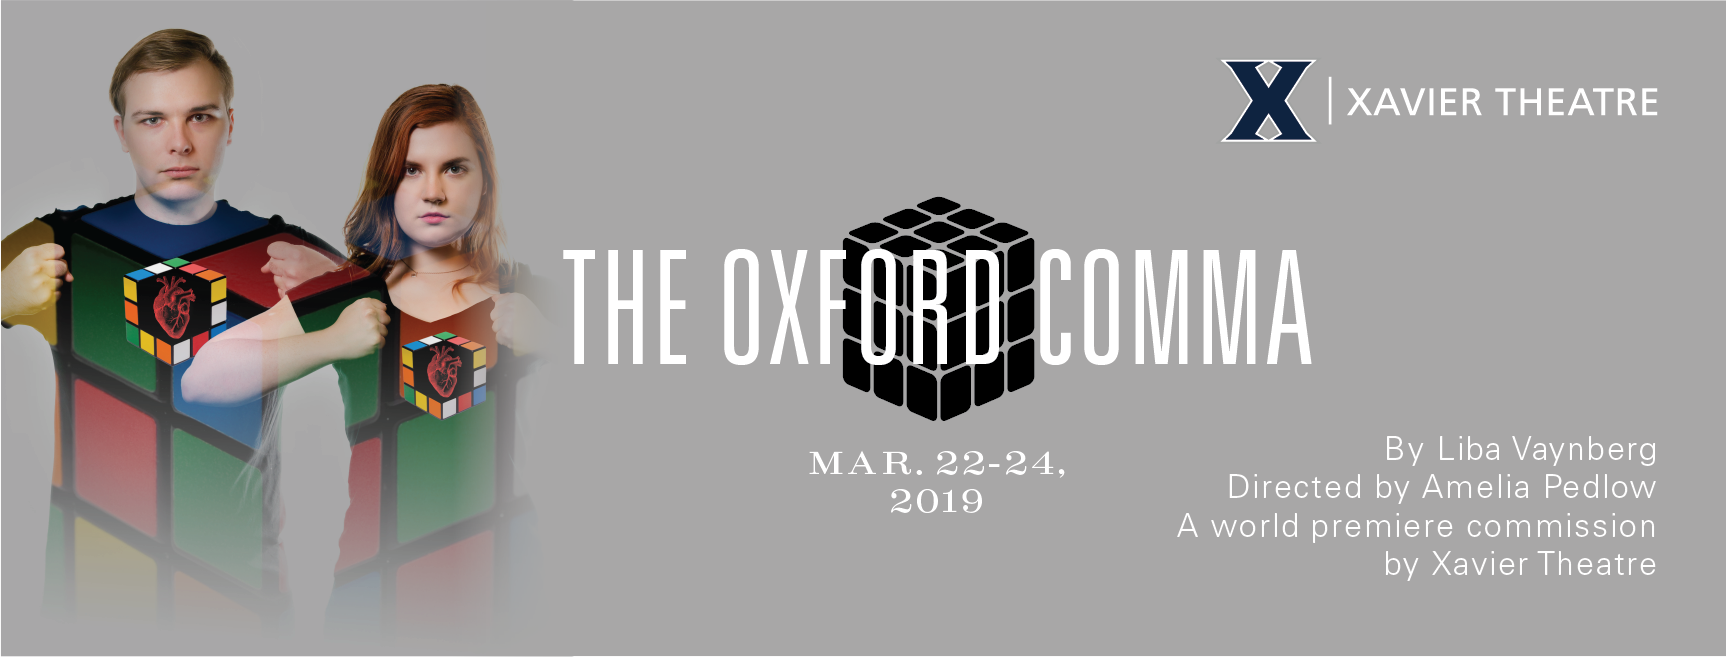 Poster for The Oxford Comma with two people in Rubix cube costumes